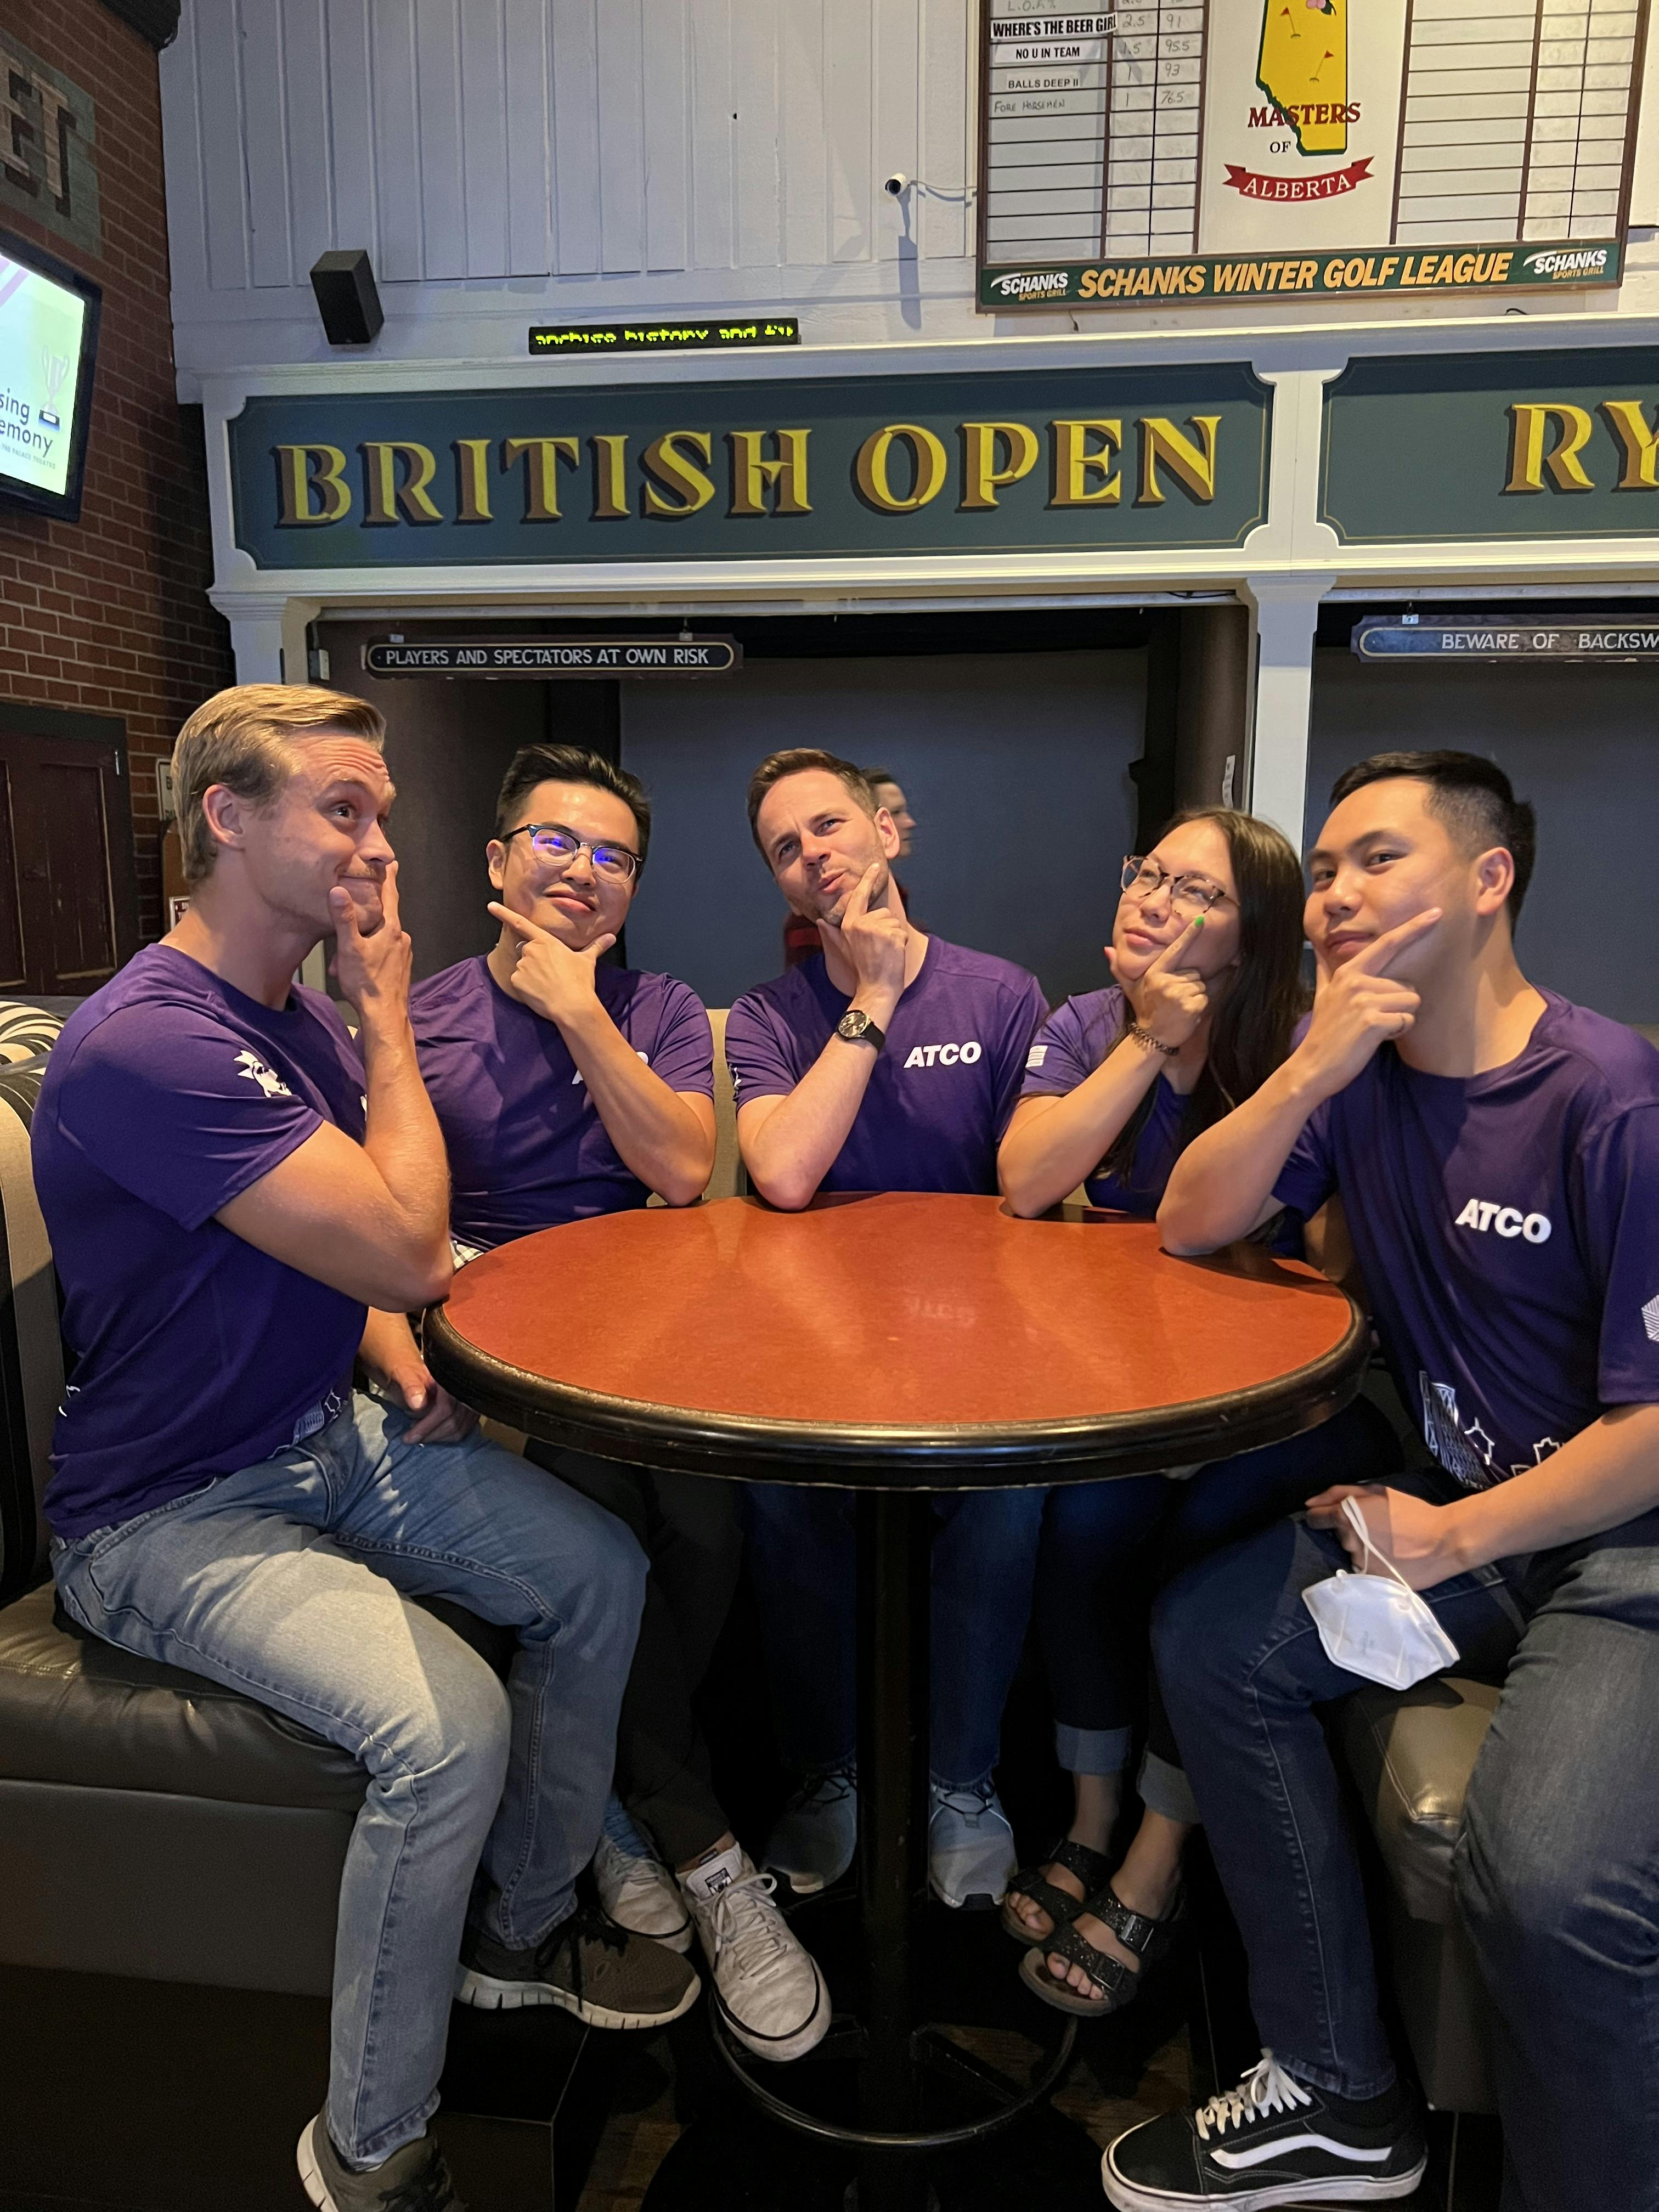 group of 5 people in purple shirts in a thinking pose